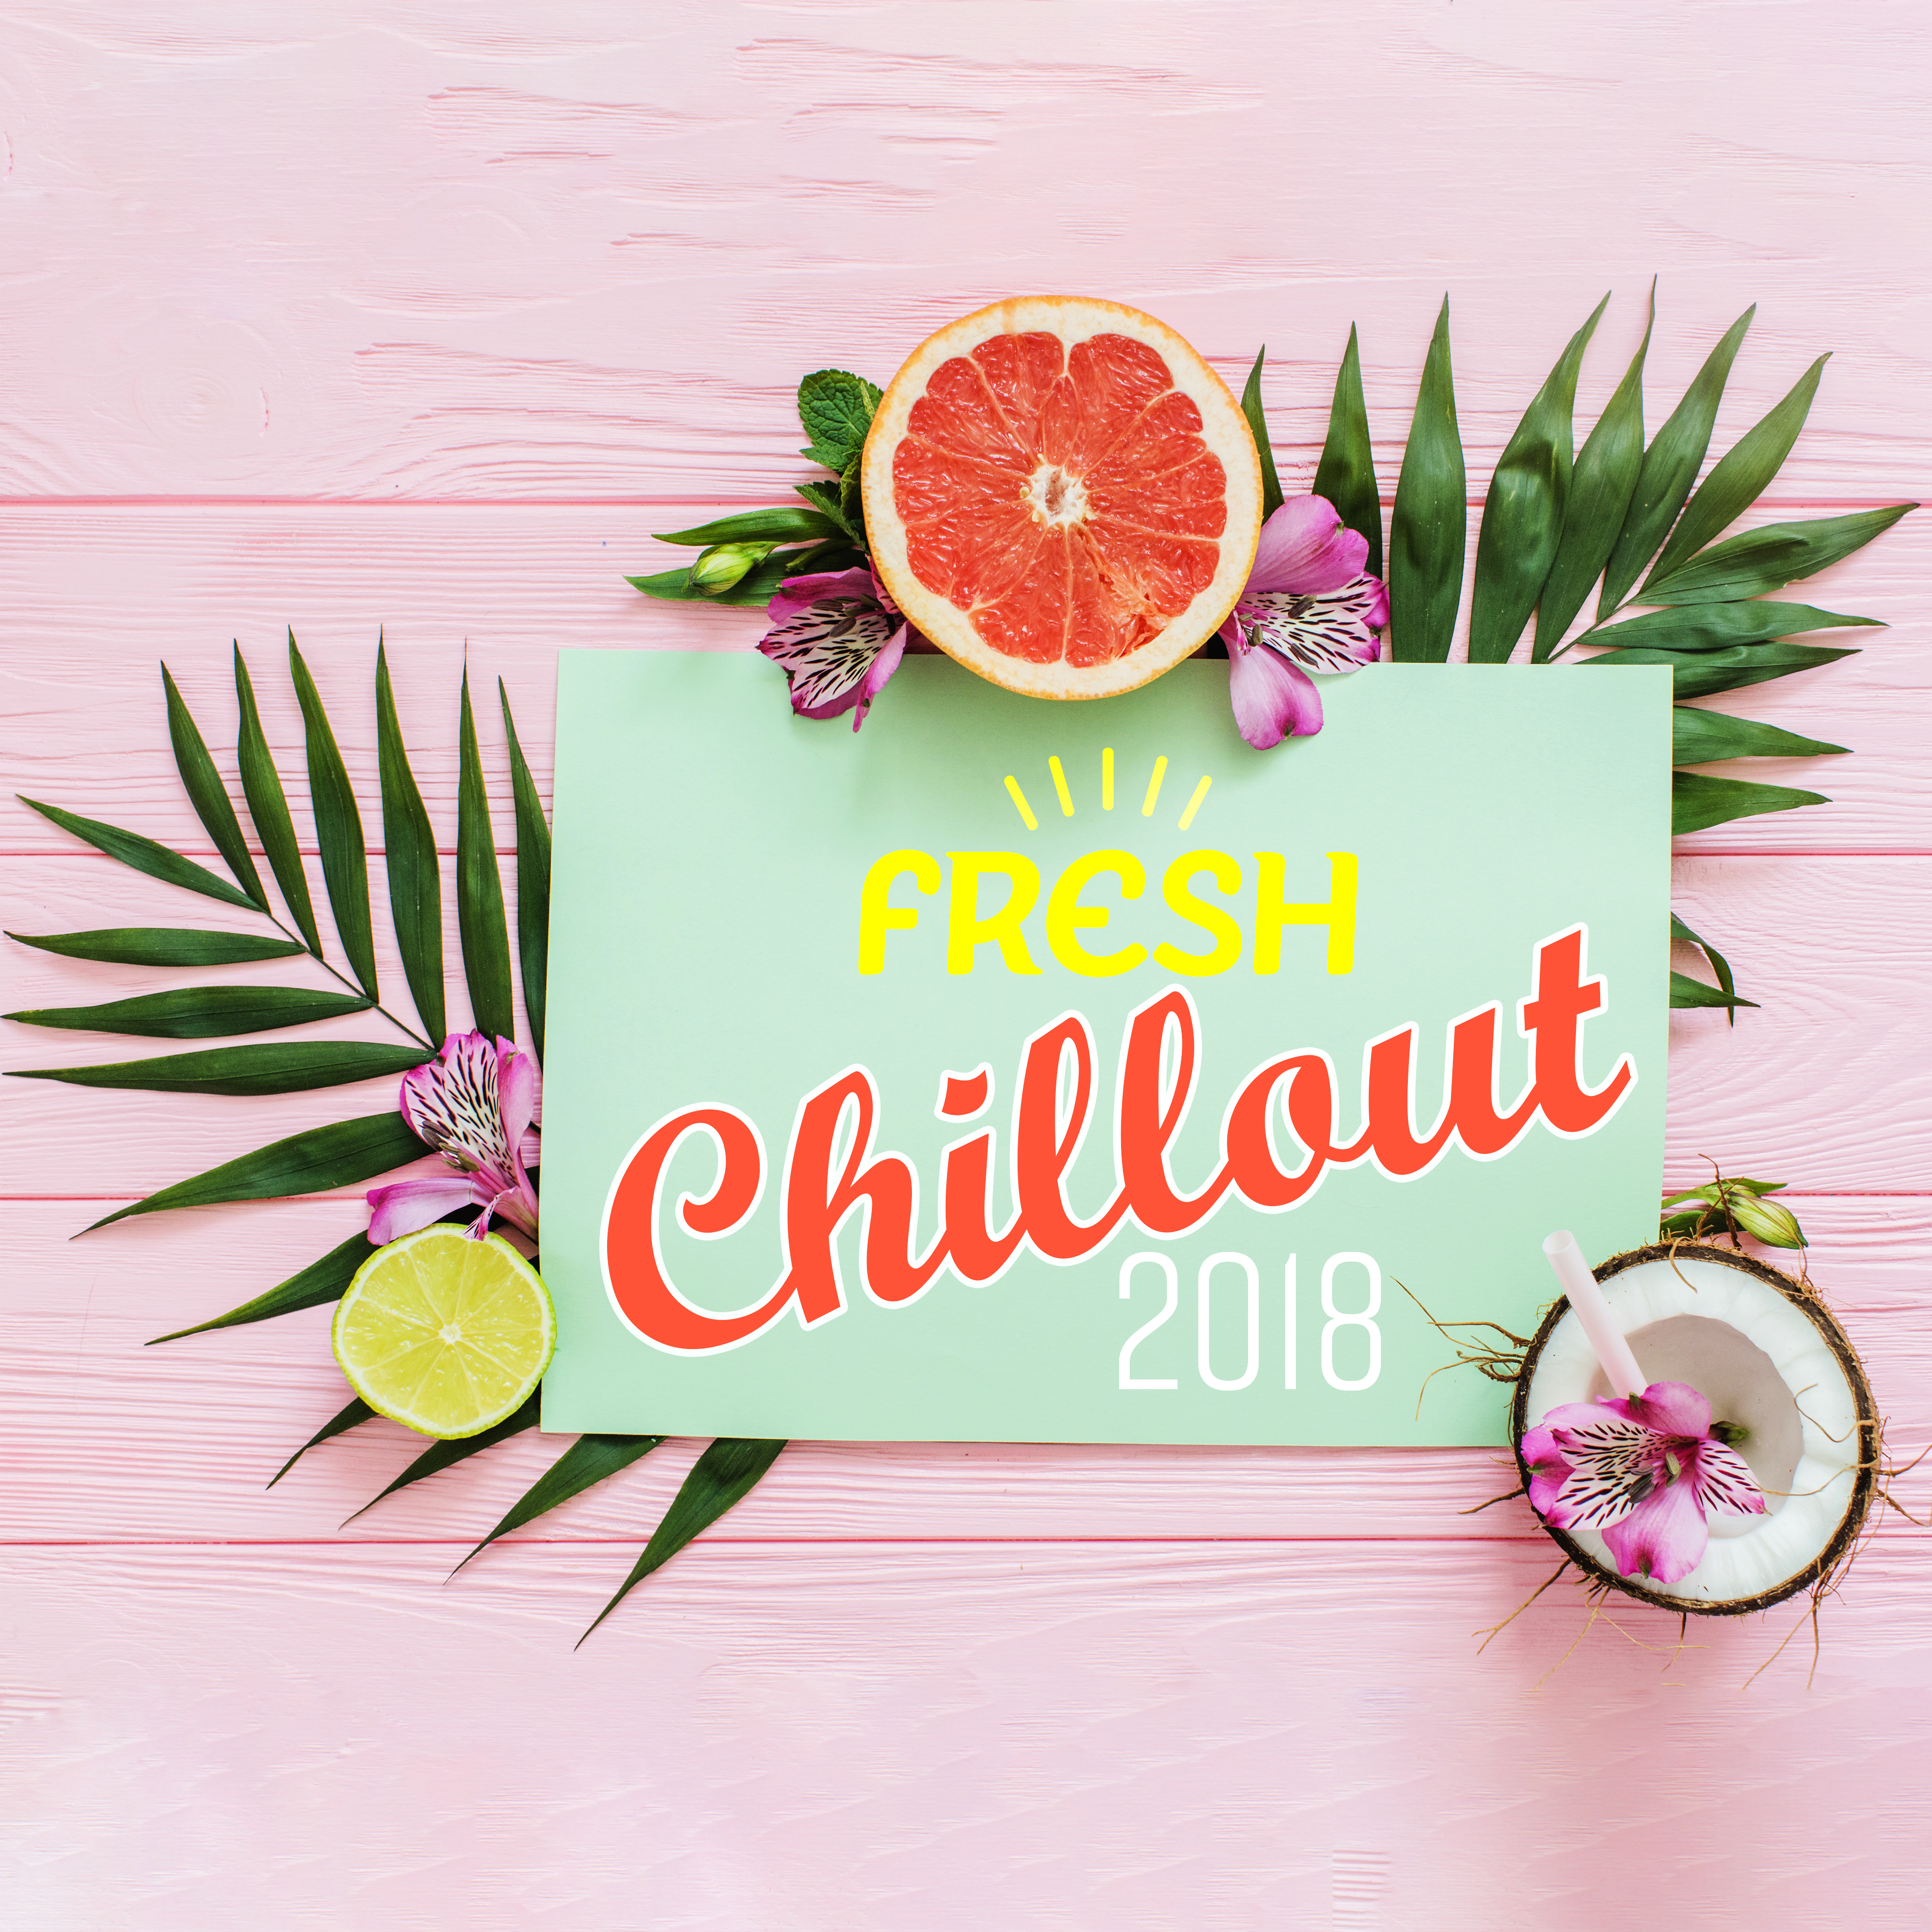 Fresh Chillout 2018